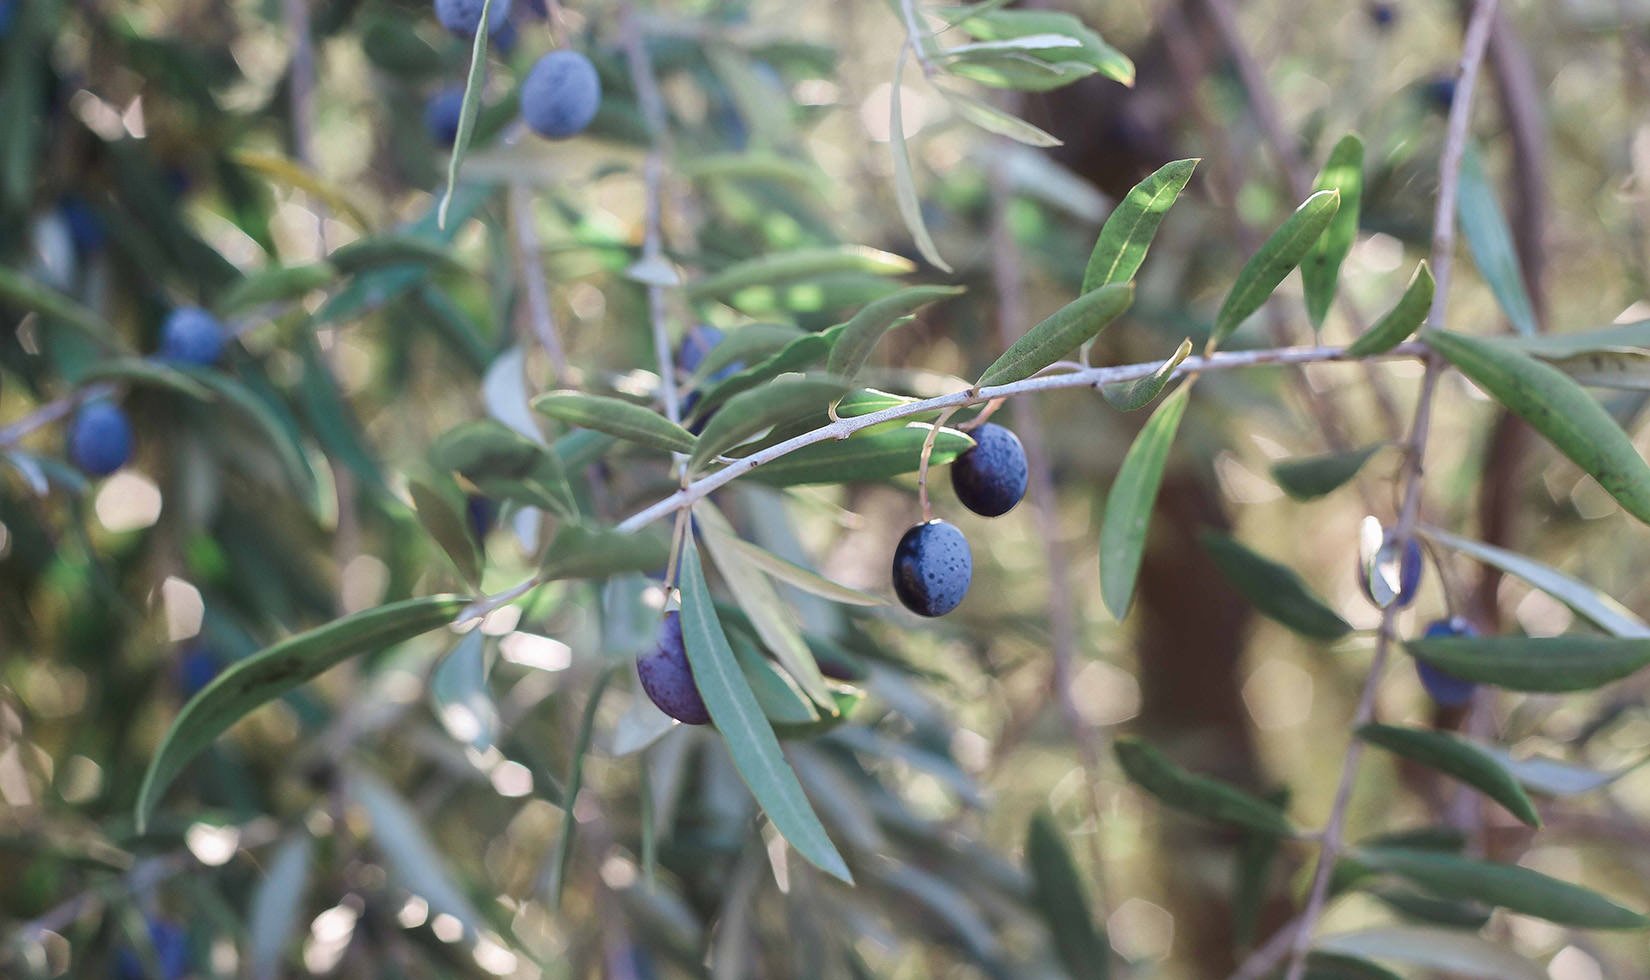 Ripe olives on the branch ready for harvest